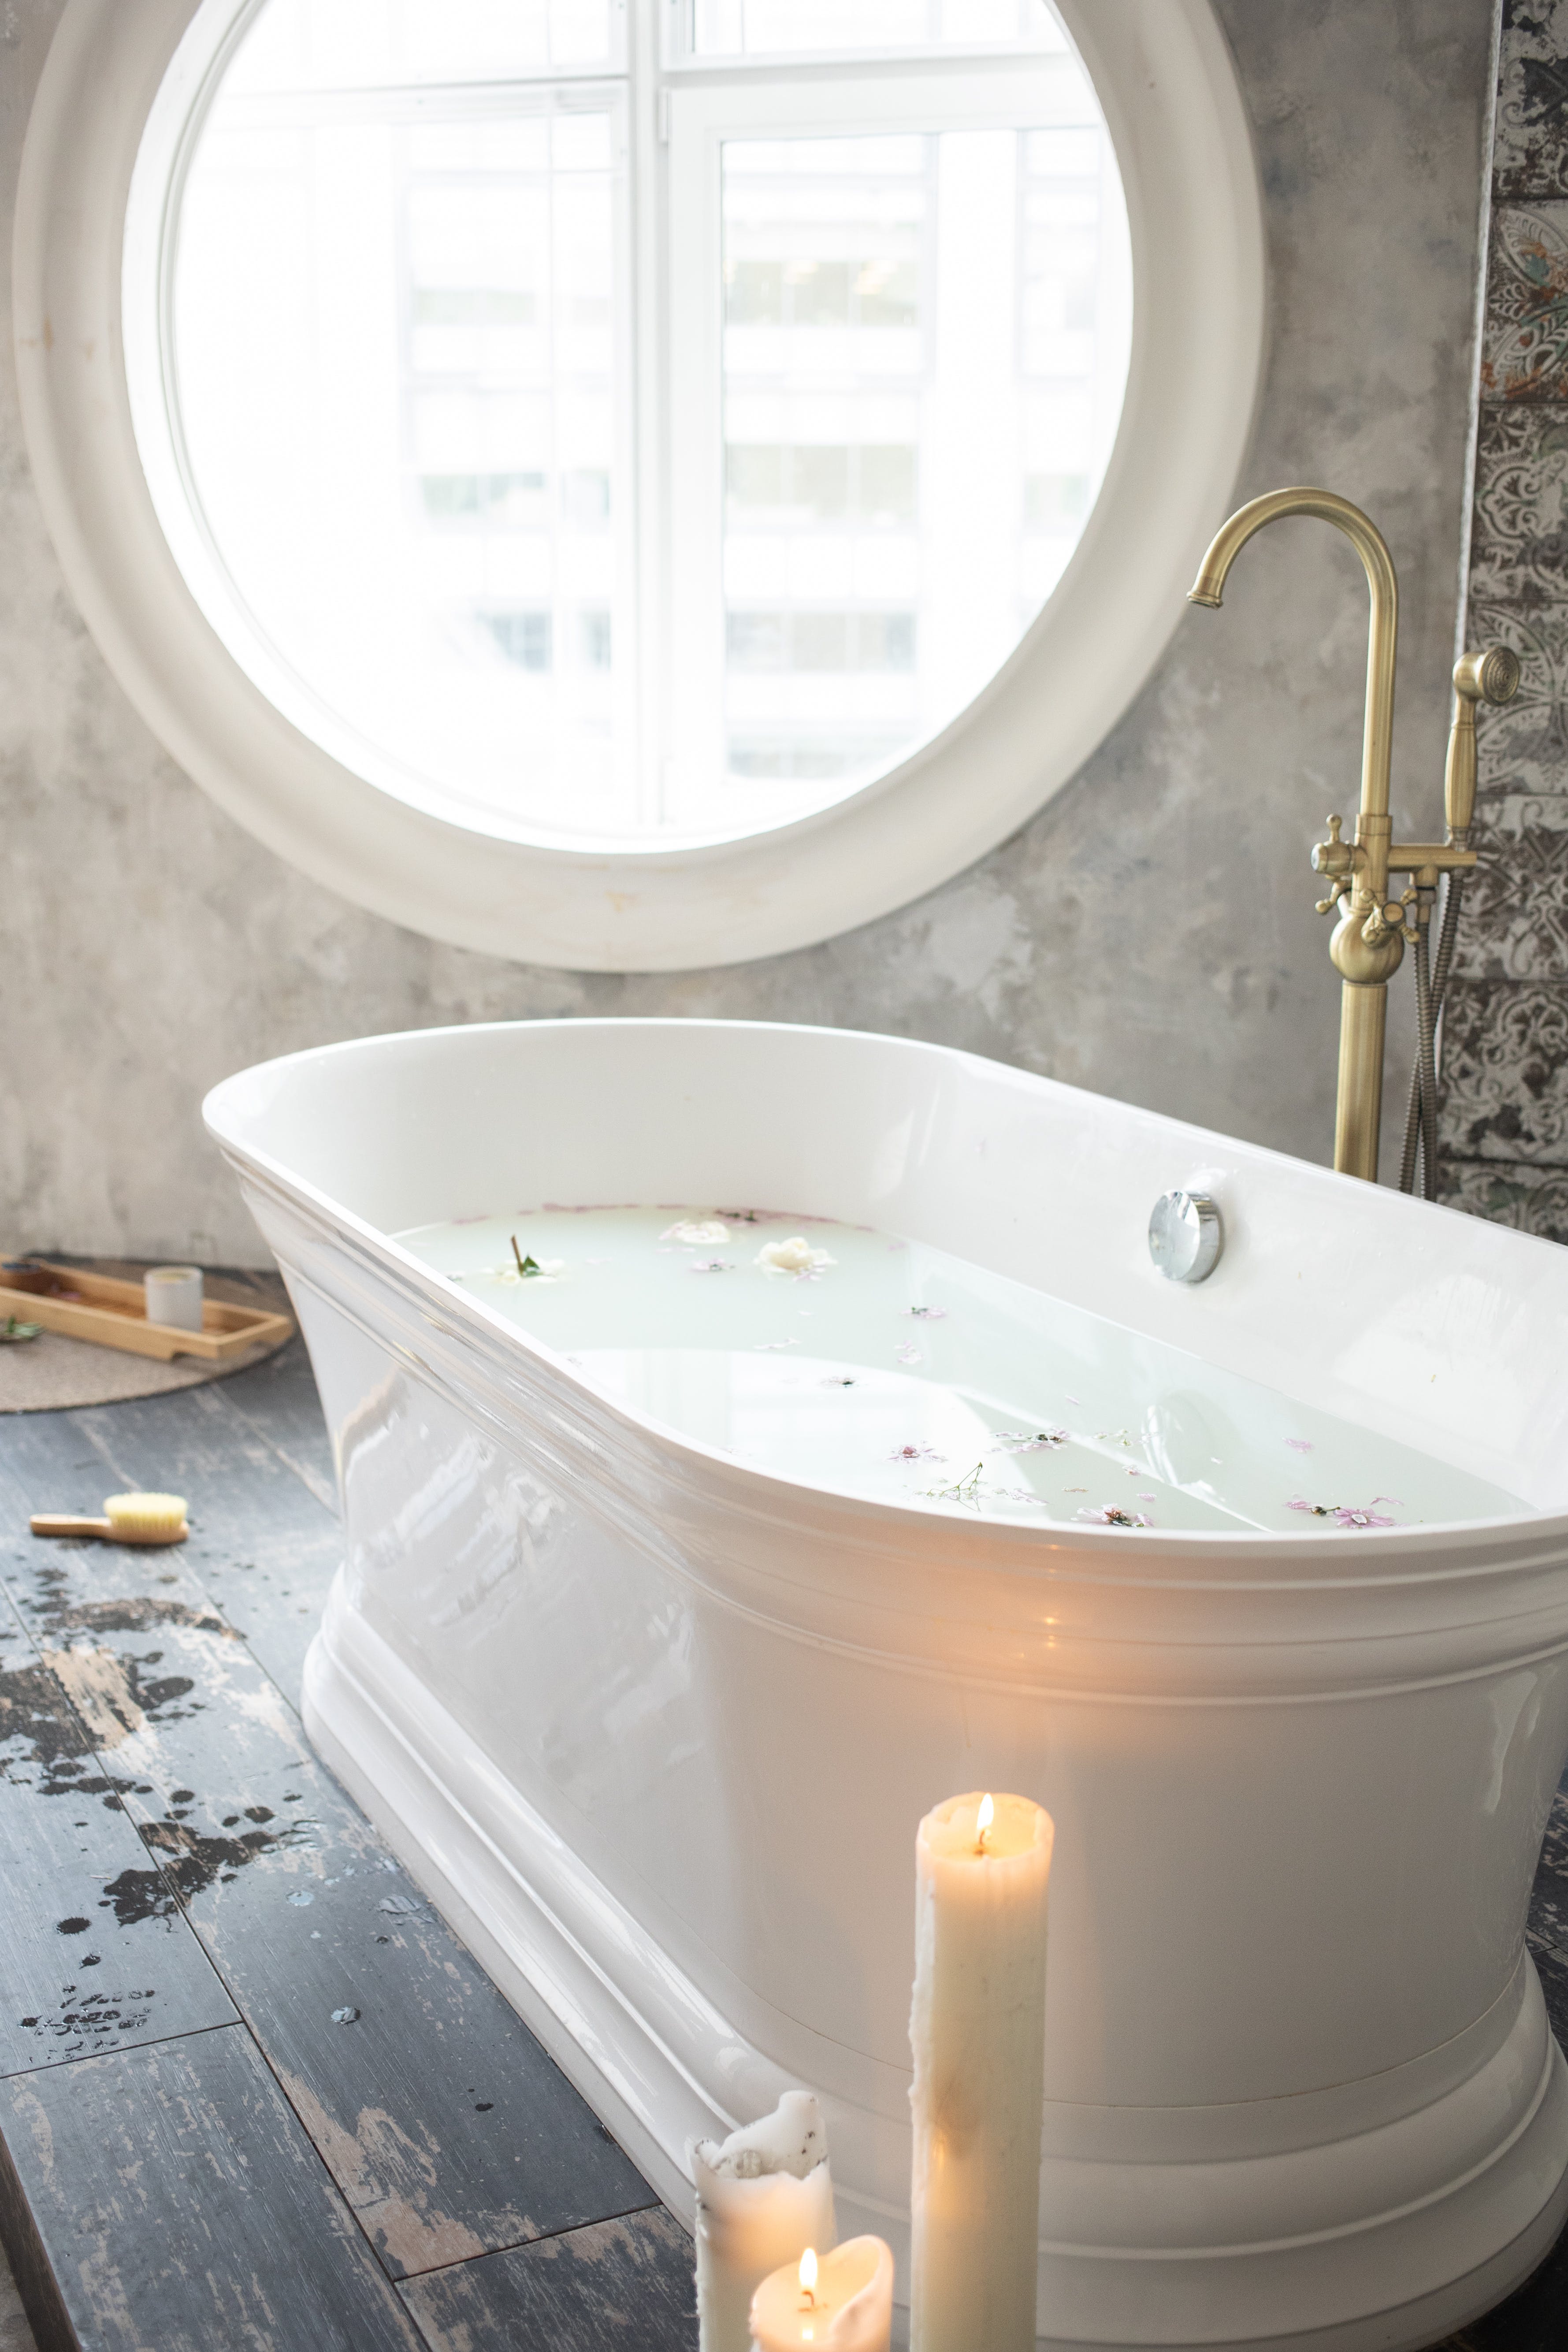 Bath tub filled with water. | Source: Pexels